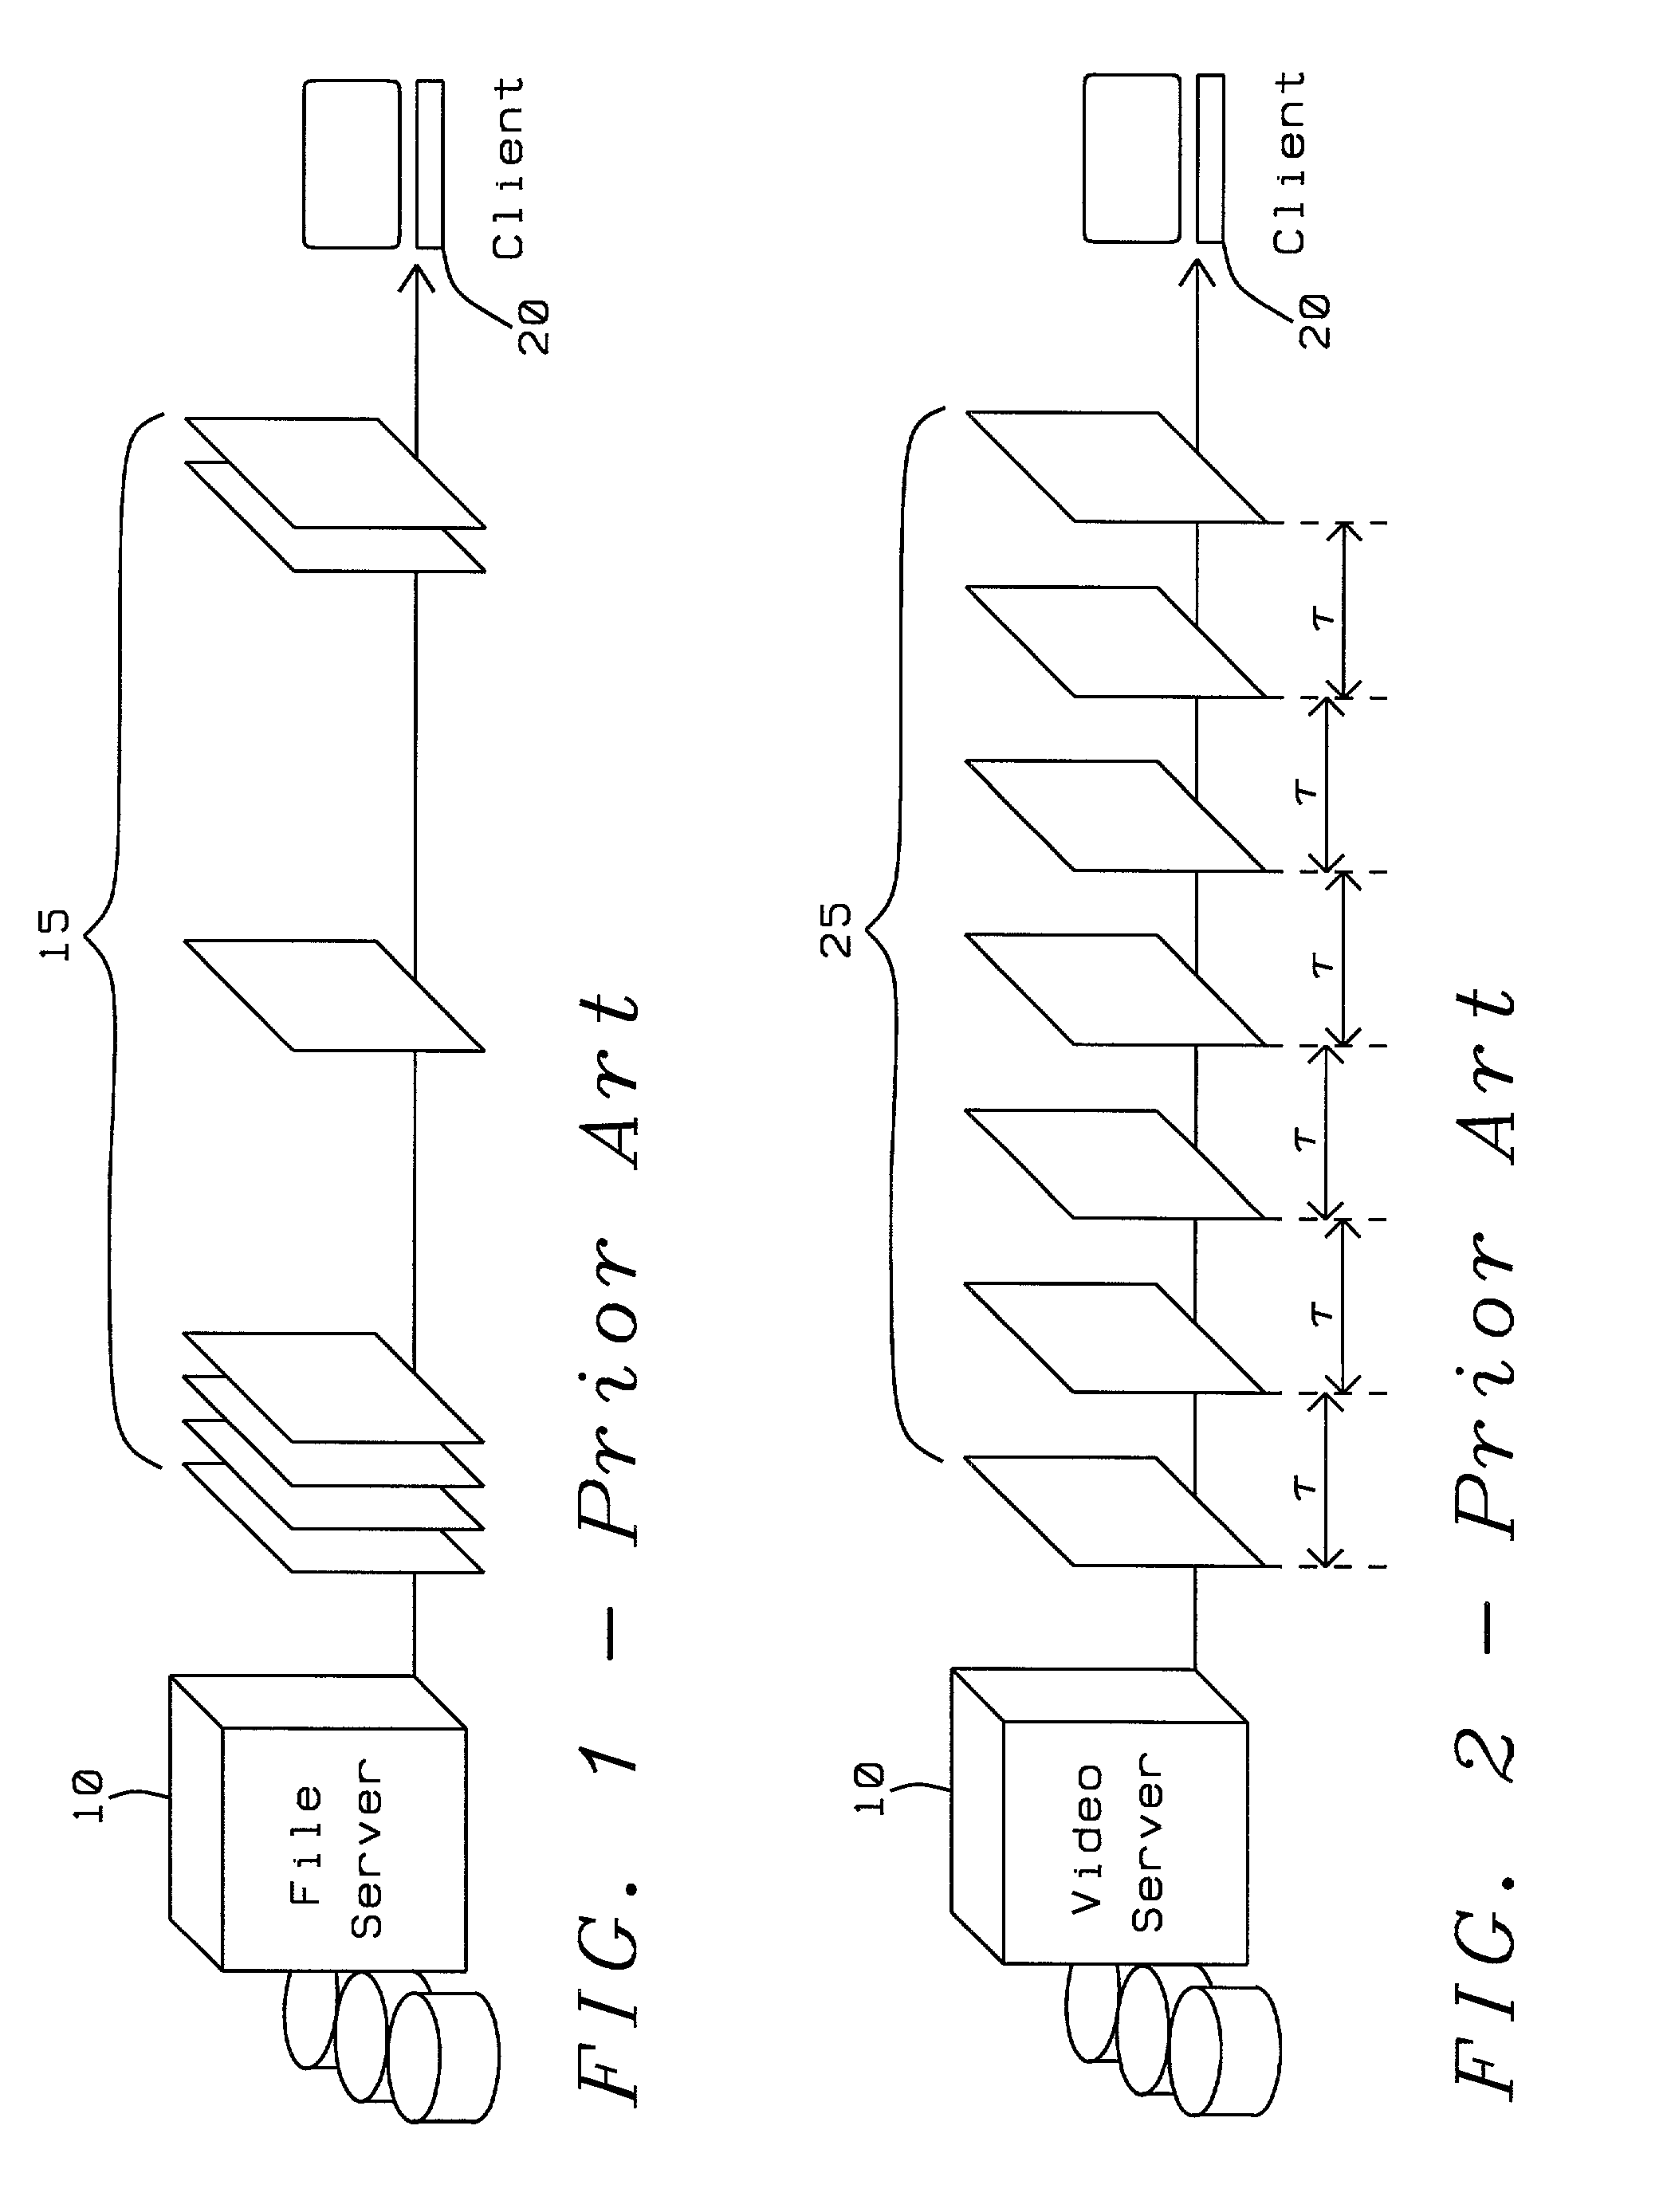 Video distribution system using disk load balancing by file copying